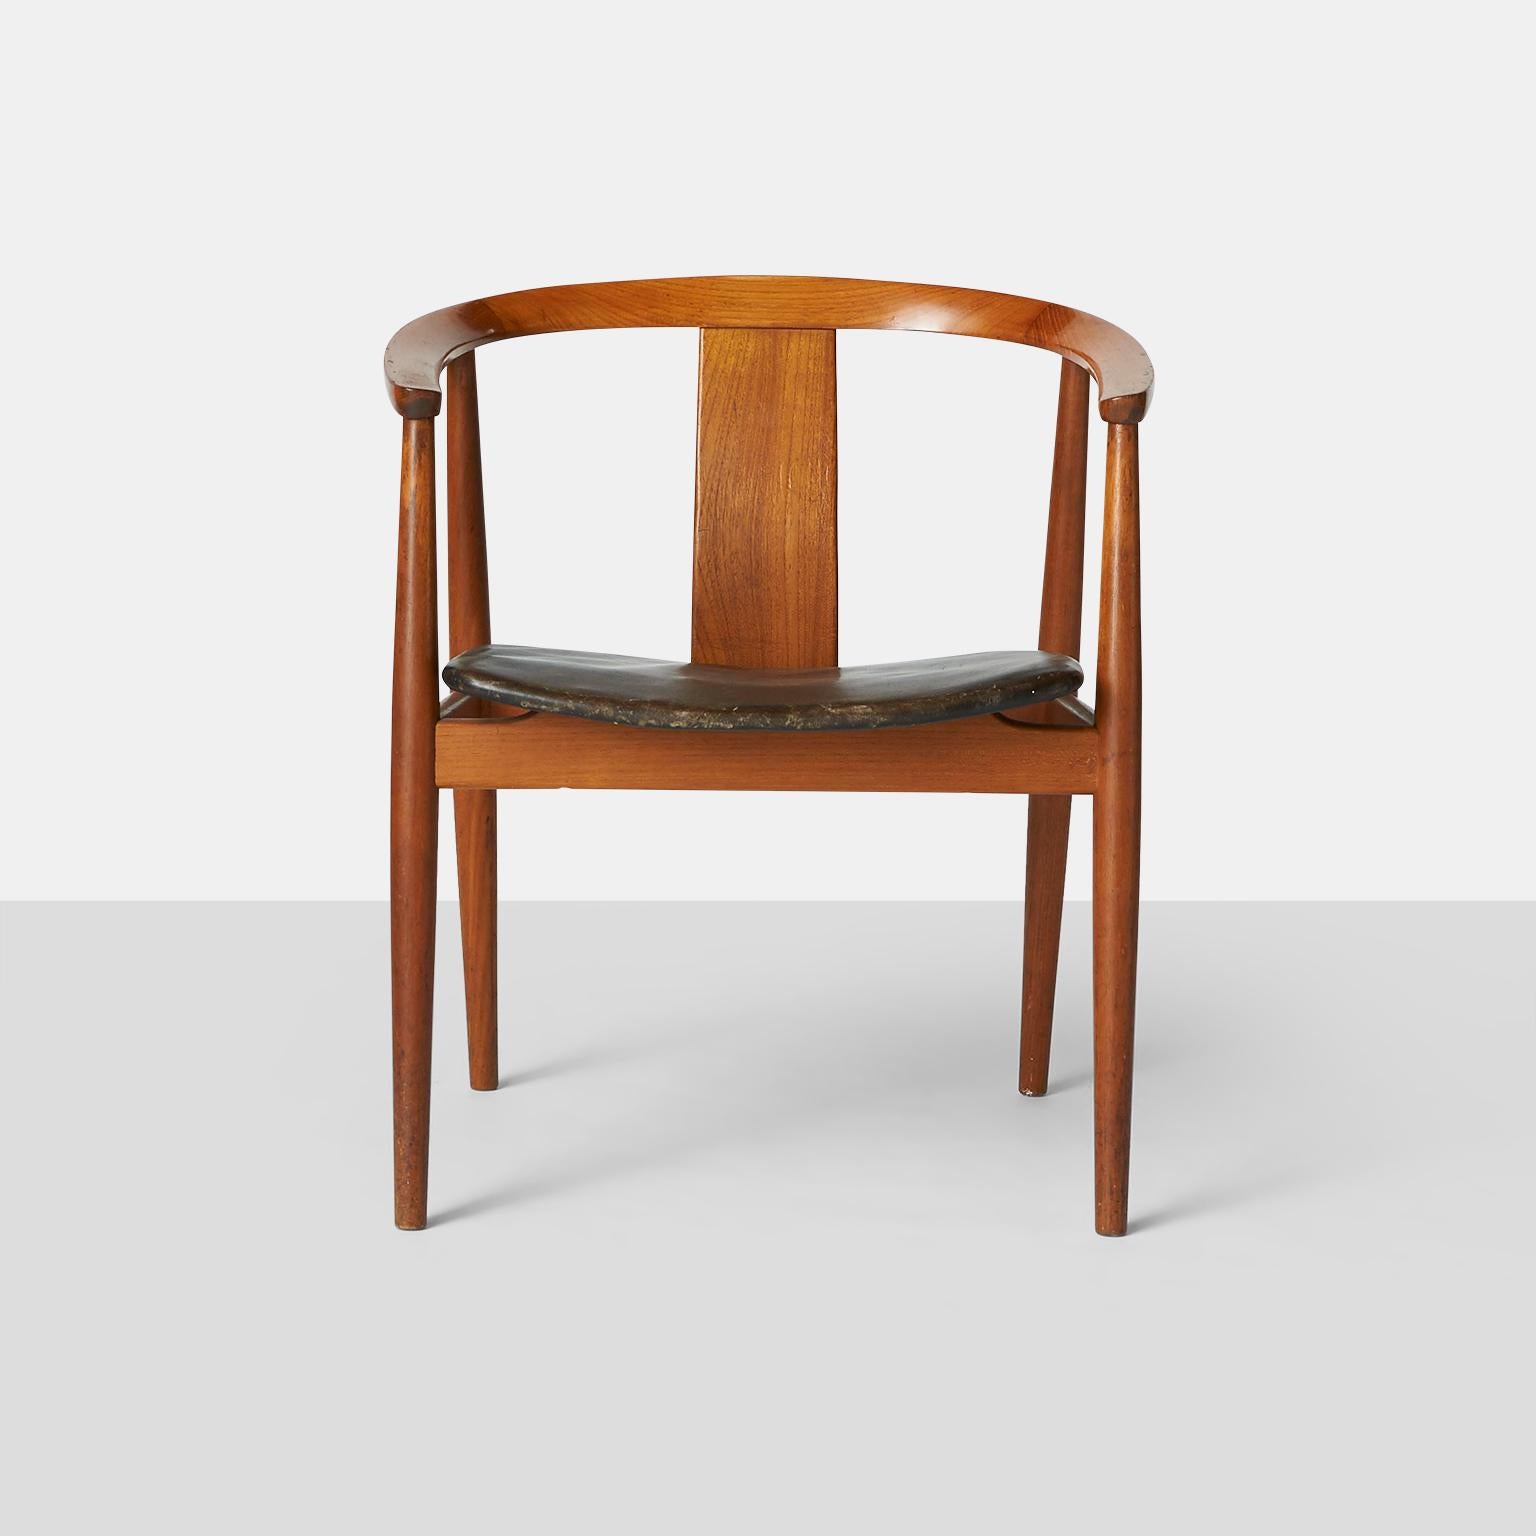 Danish Teak & Leather Chair by Tove and Edvard Kindt-Larsen For Sale